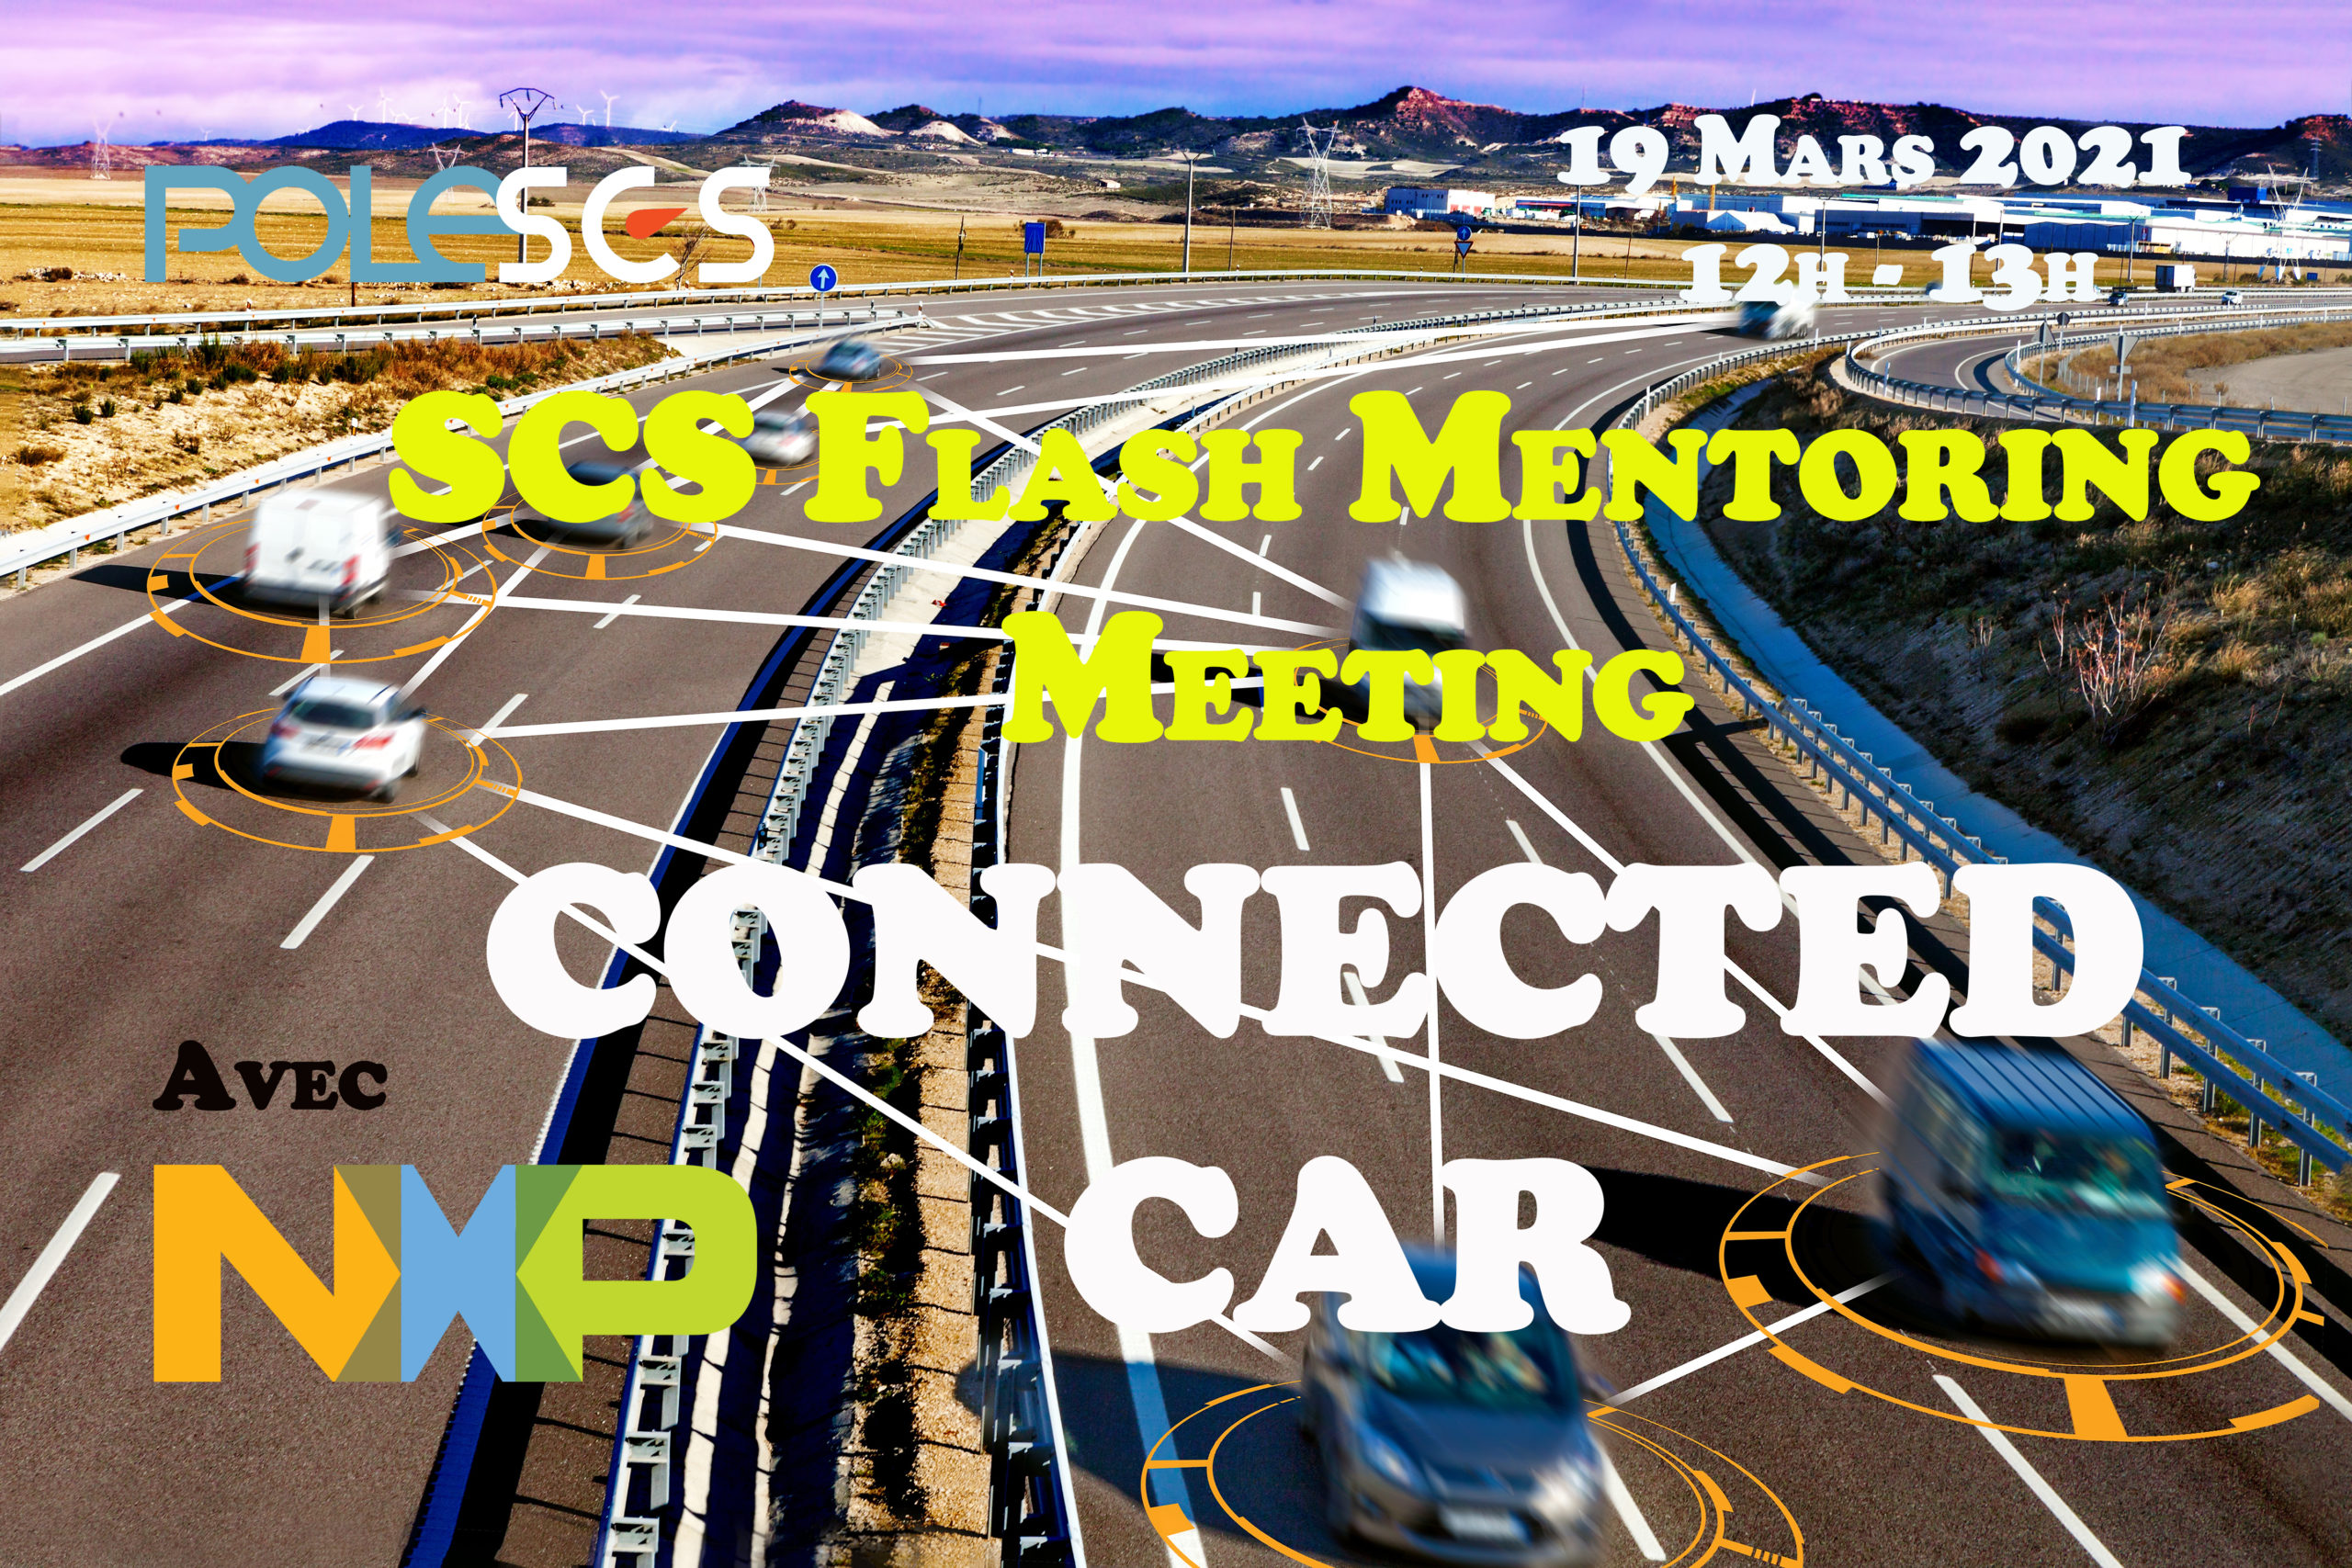 SCS Flash Mentoring Meeting – Connected Car